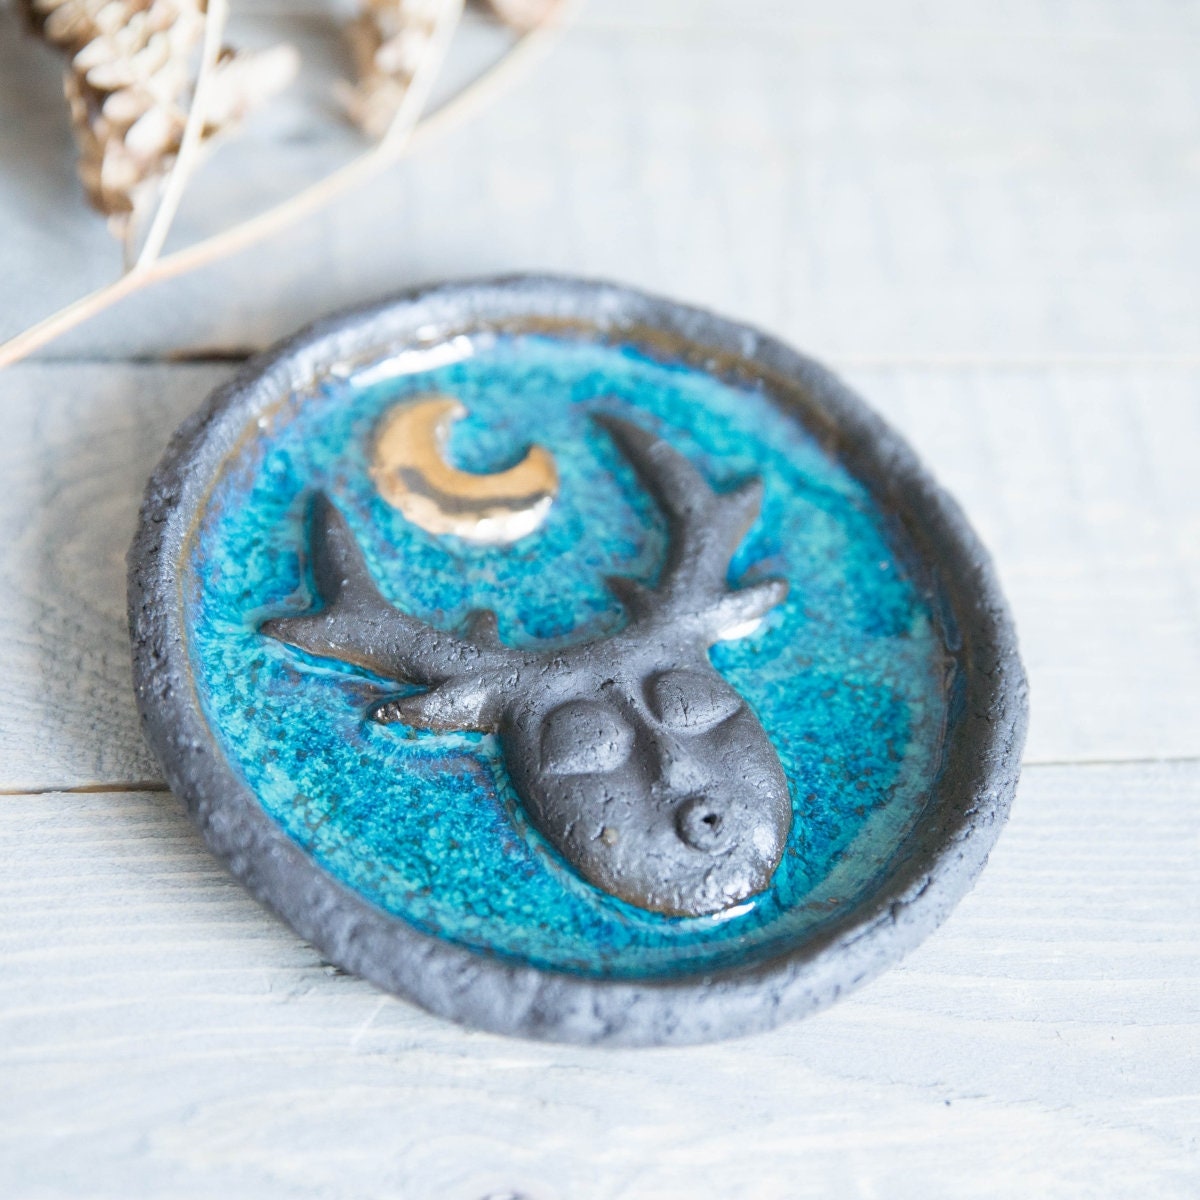 Palo Santo burner plate with the gold plated moon - Dark blue cone incense smudging ceramic plate